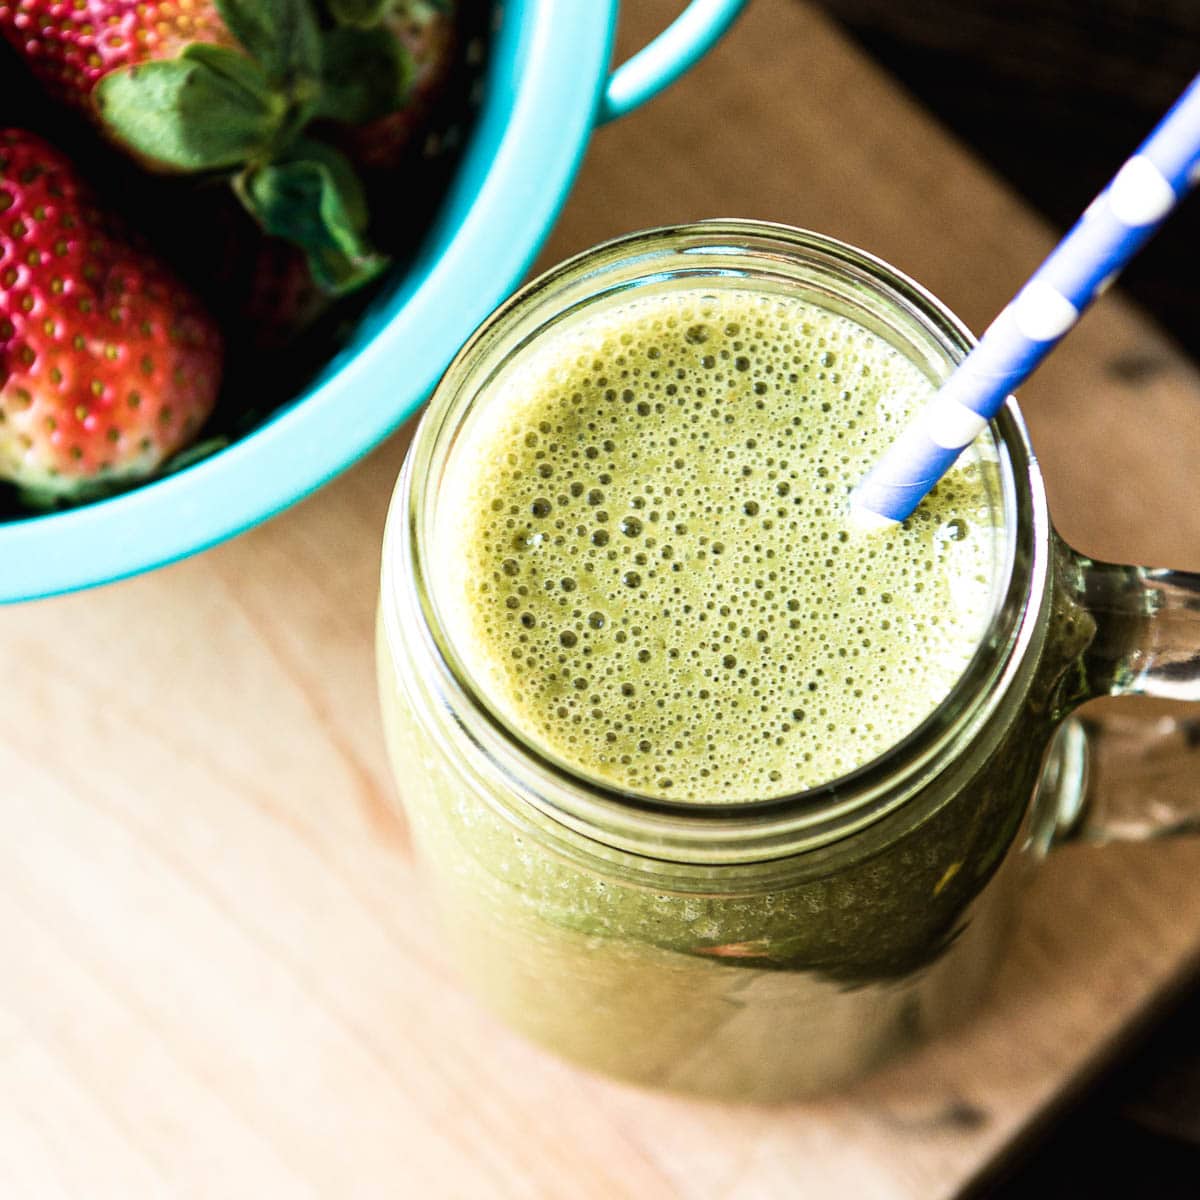 Spinach Strawberry Banana Smoothie - Simple Green Smoothies